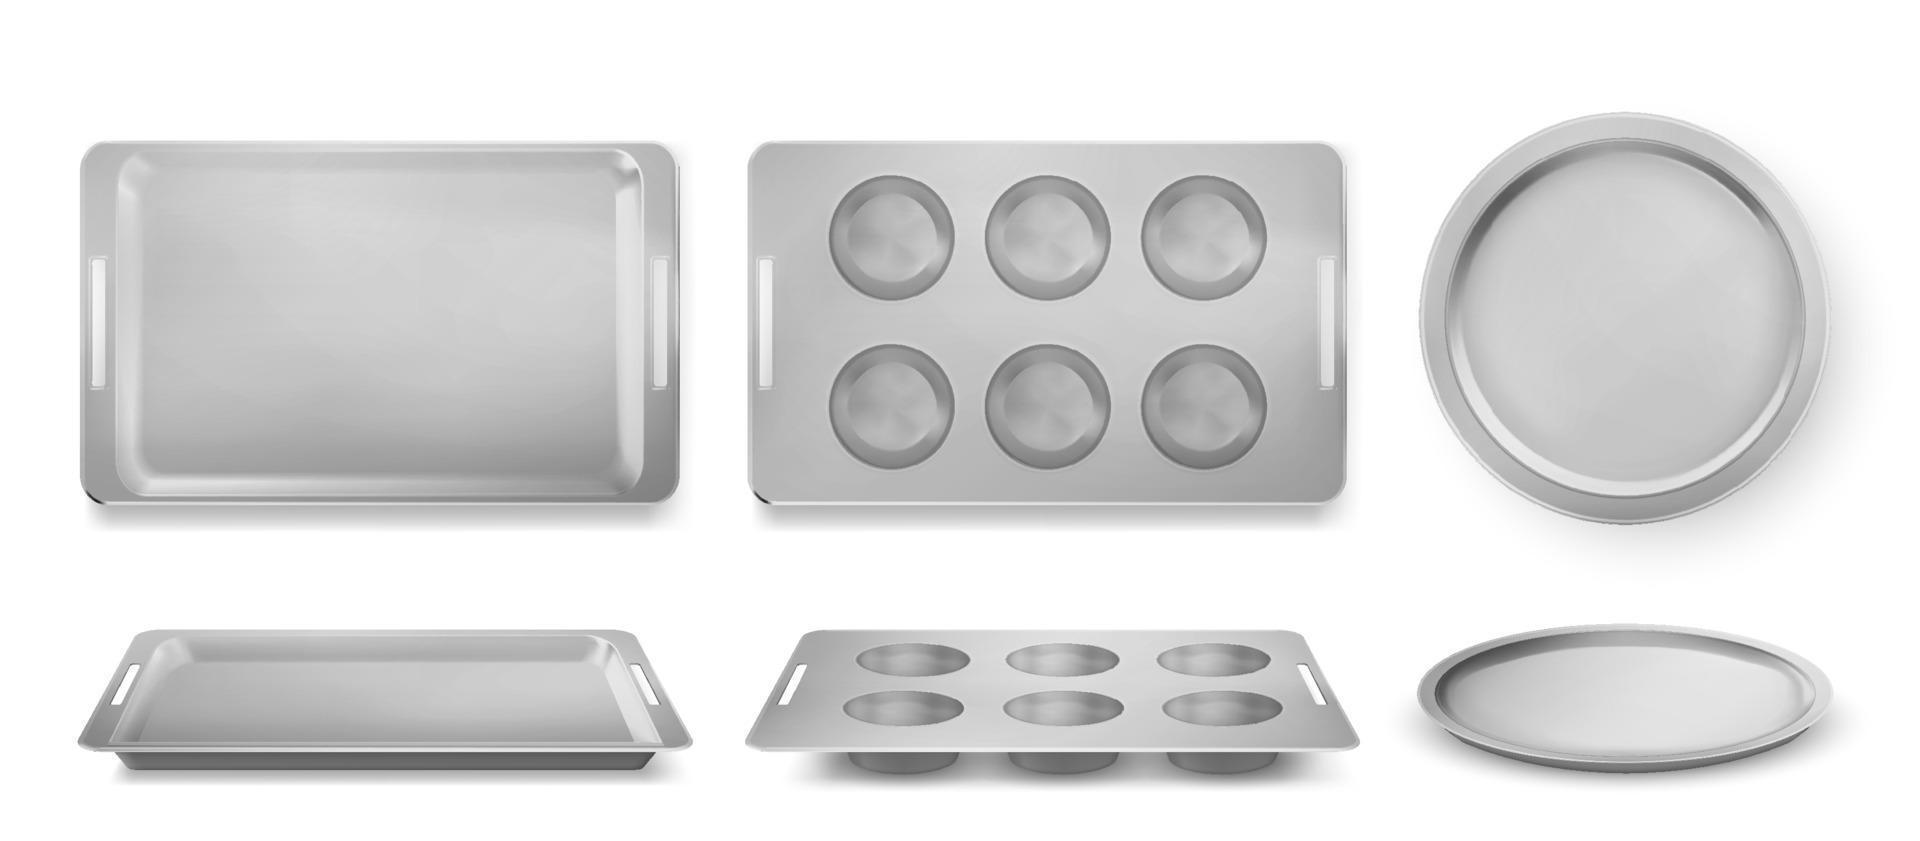 Trays for baking muffins, pizza and bakery set vector